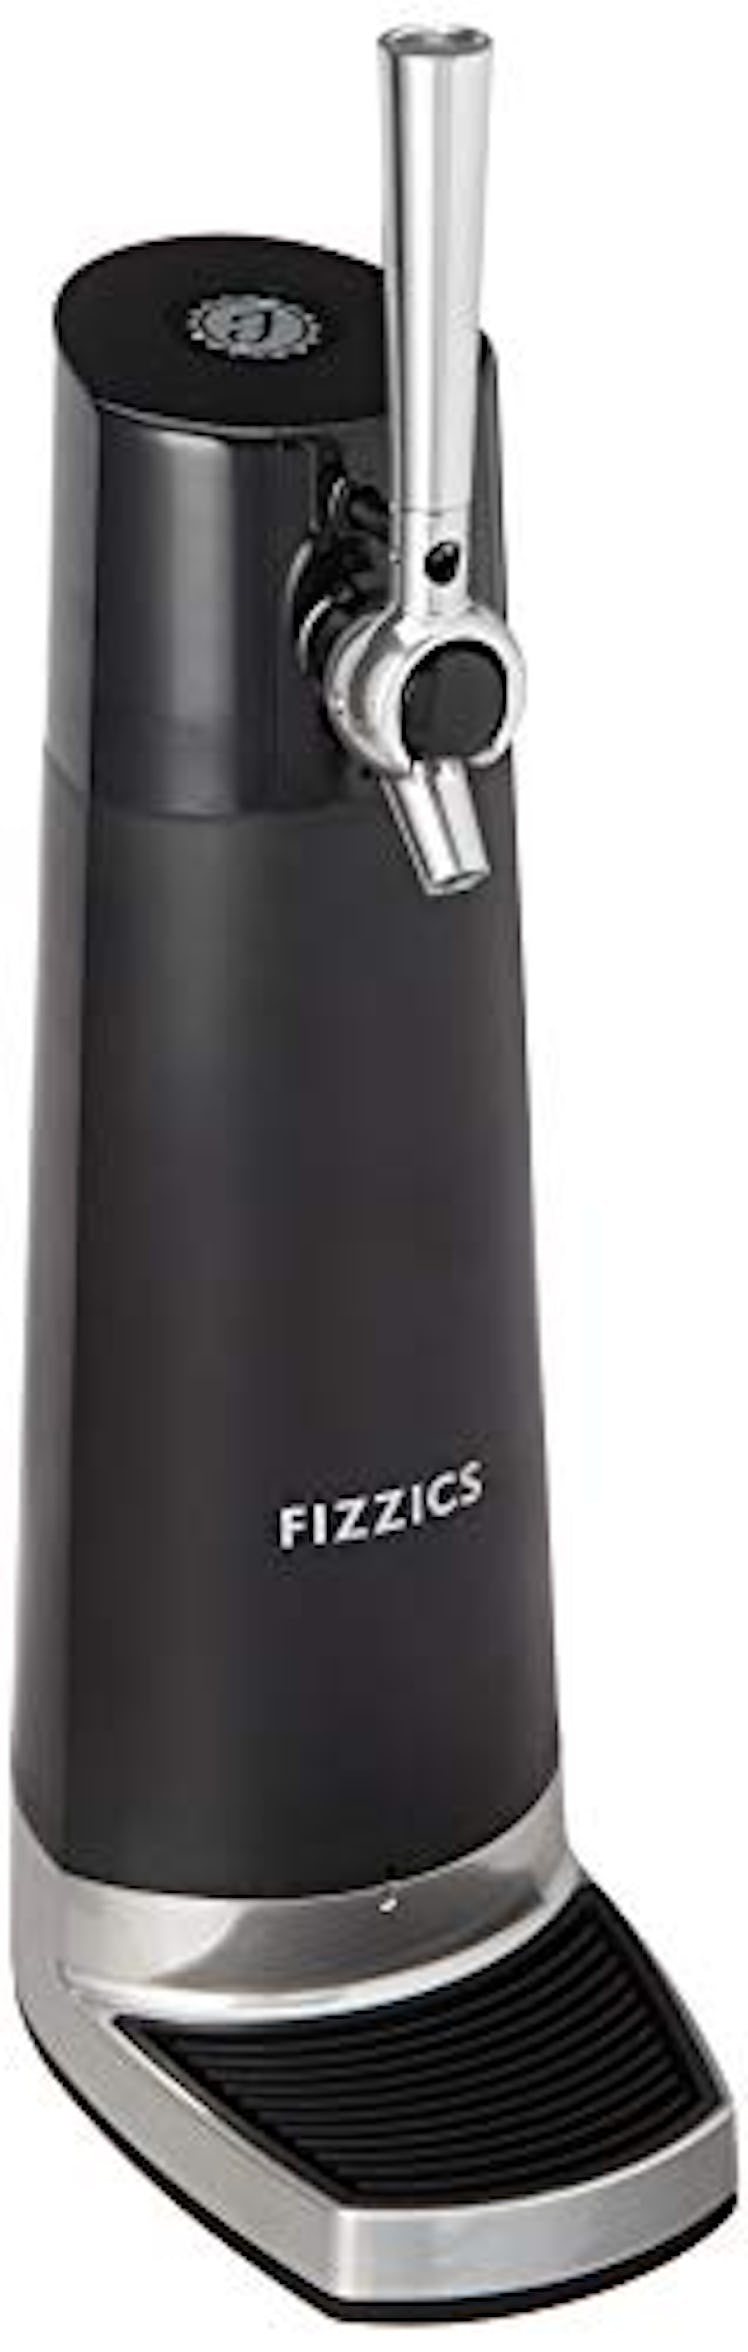 Fizzics FZ403 DraftPour Beer Dispenser - Converts Any Can or Bottle Into a Nitro-Style Draft, Awesom...